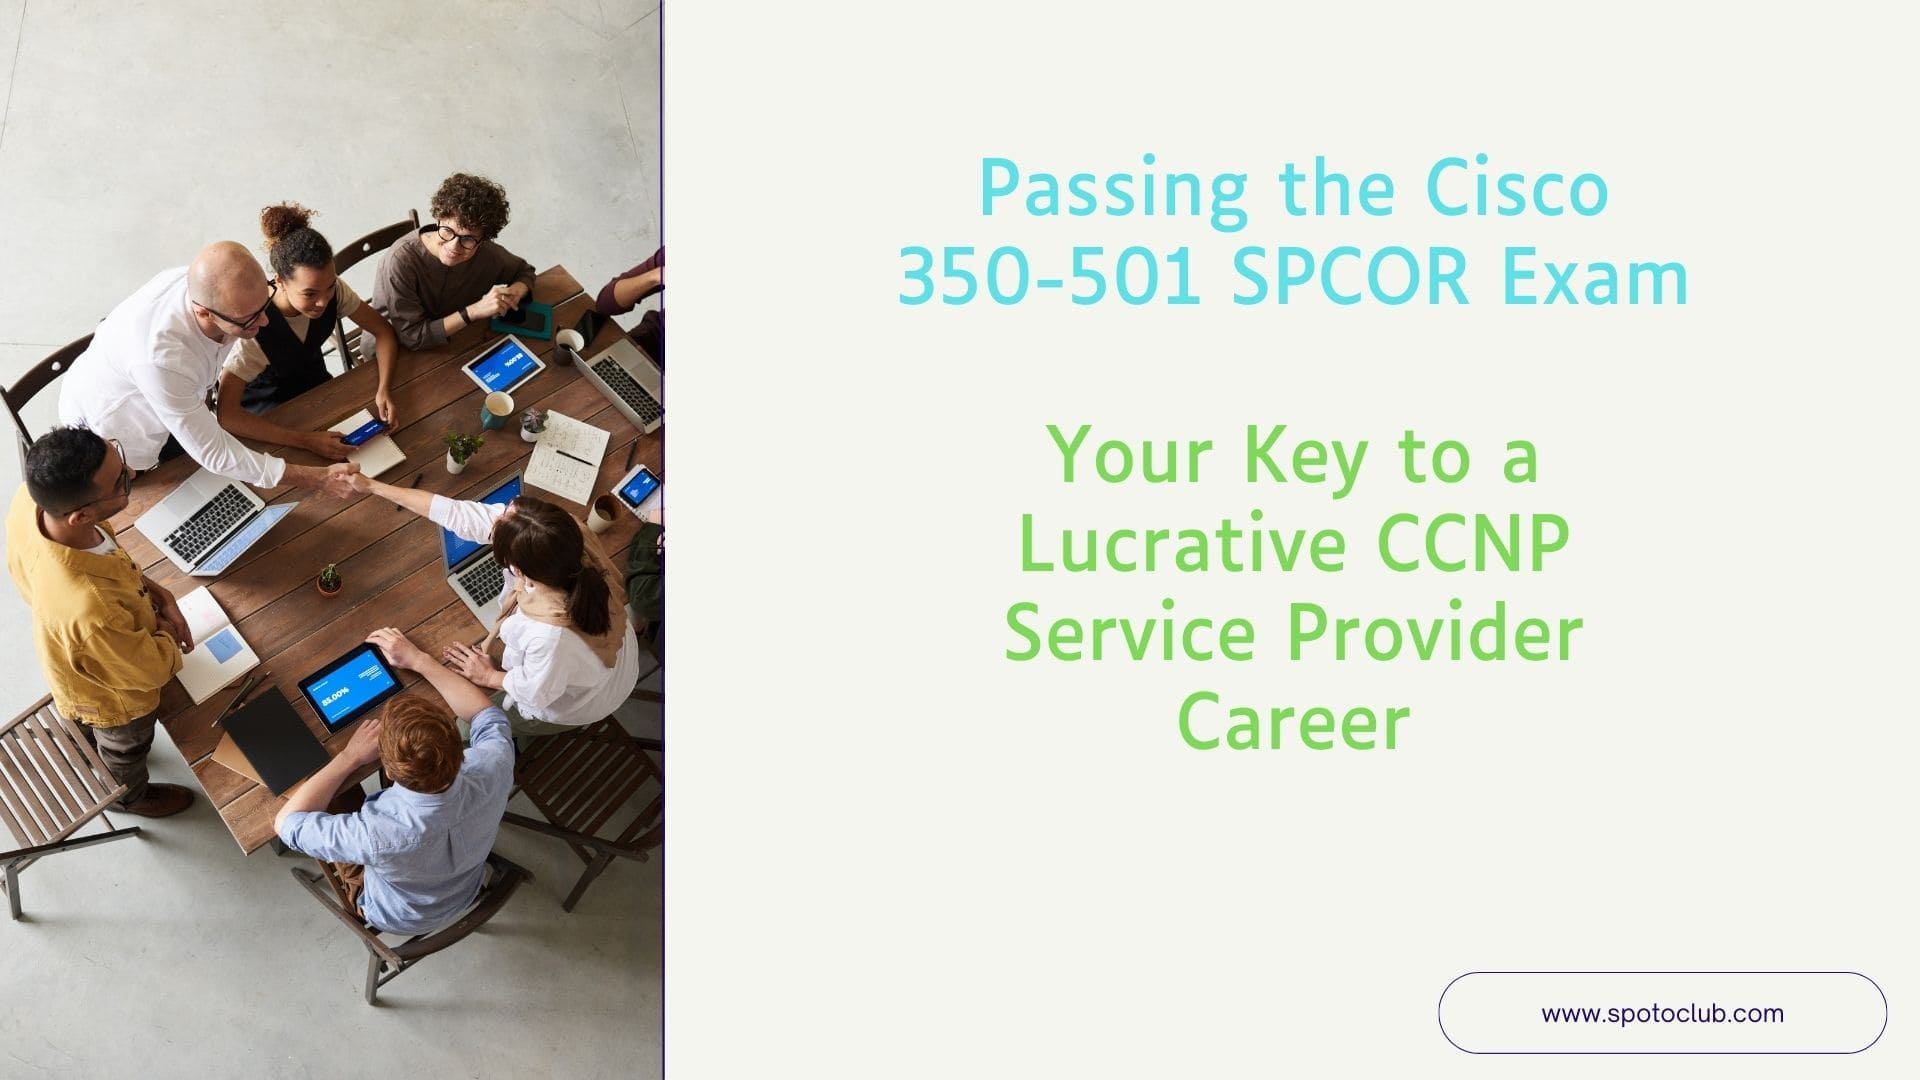 Your Key to a Lucrative CCNP Service Provider Career